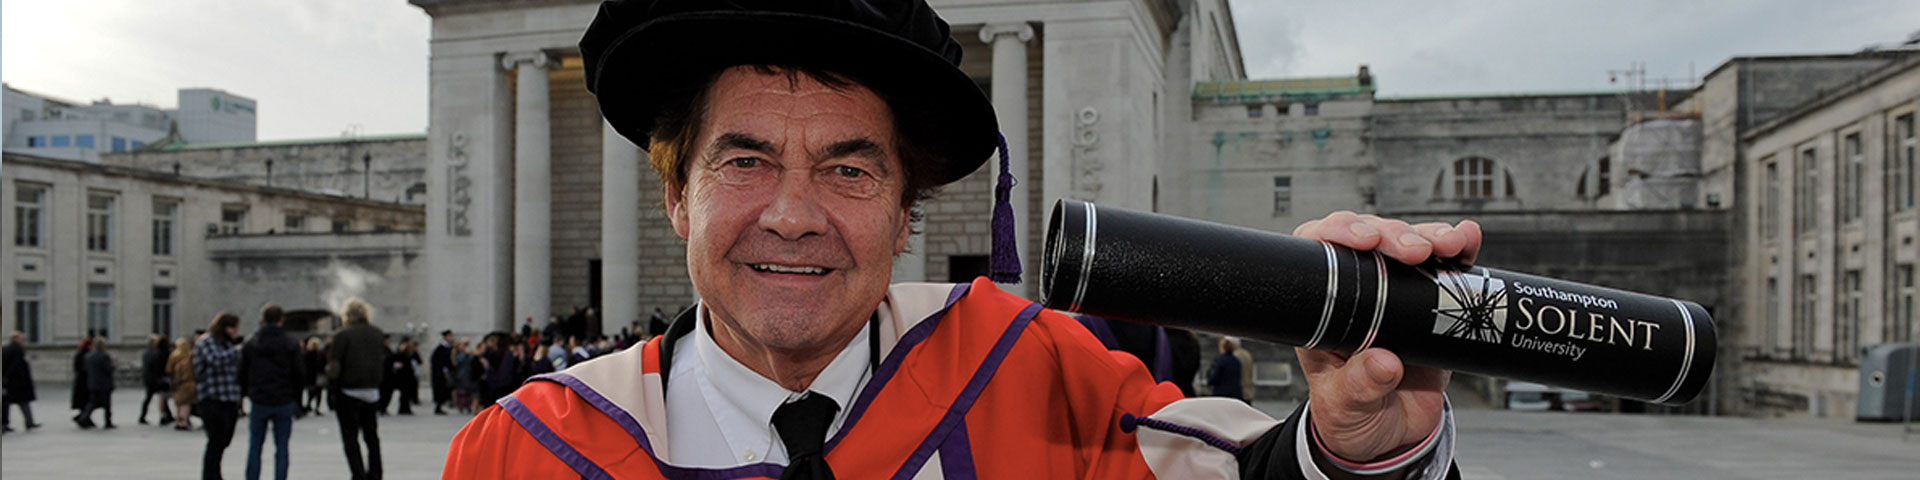 Composer, Simon May with his honorary degree from Solent University